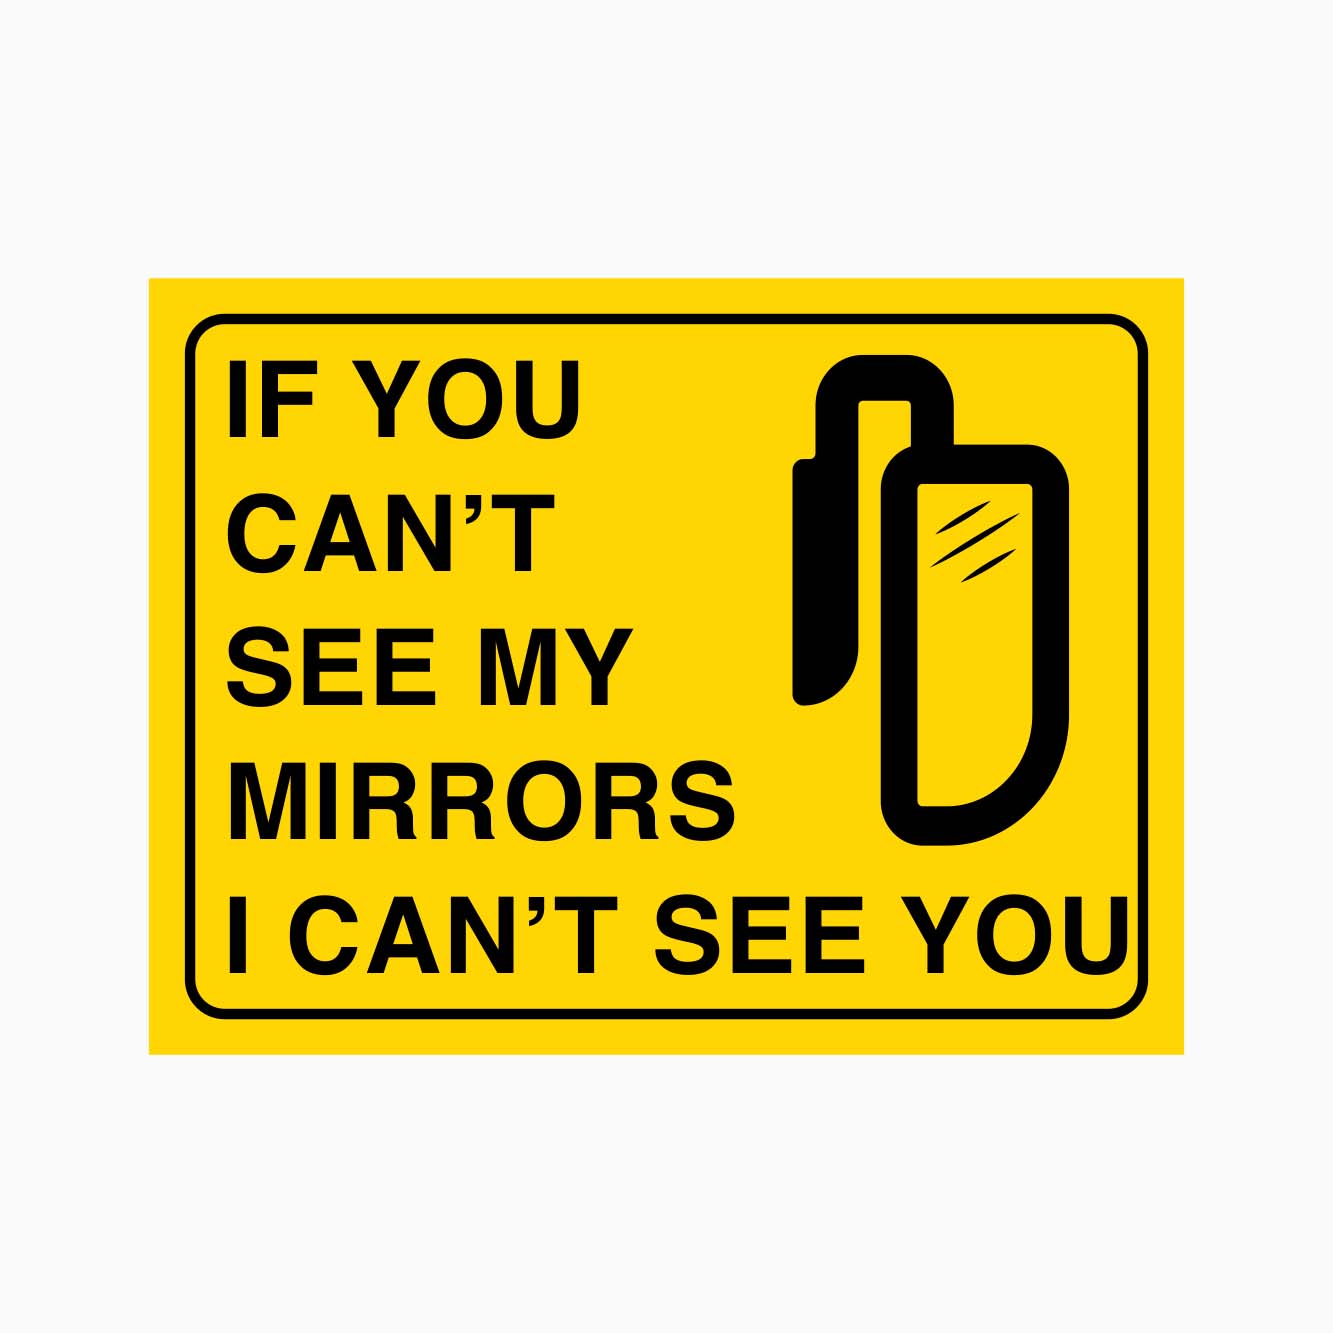 If you can't see my mirrors I can't see you Sign - get signs 